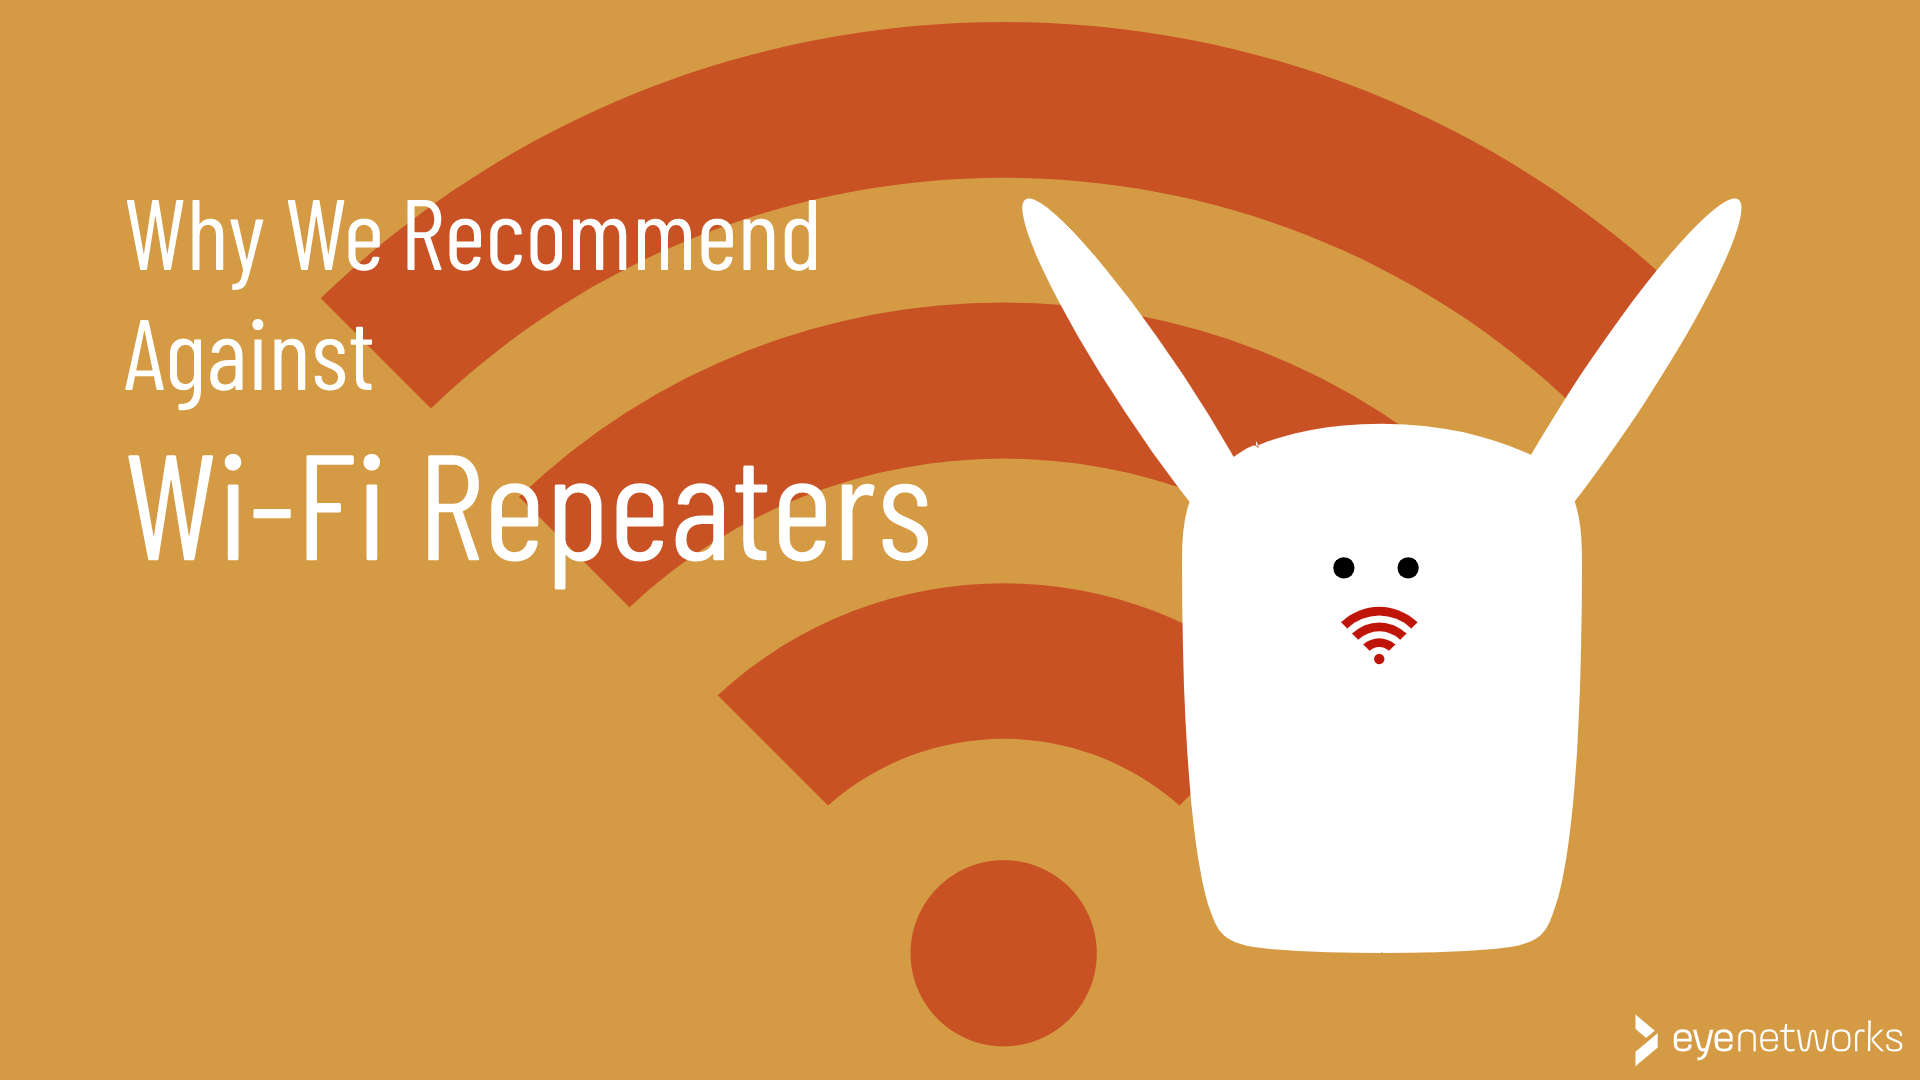 Why We Recommend Against Wi-Fi Repeaters